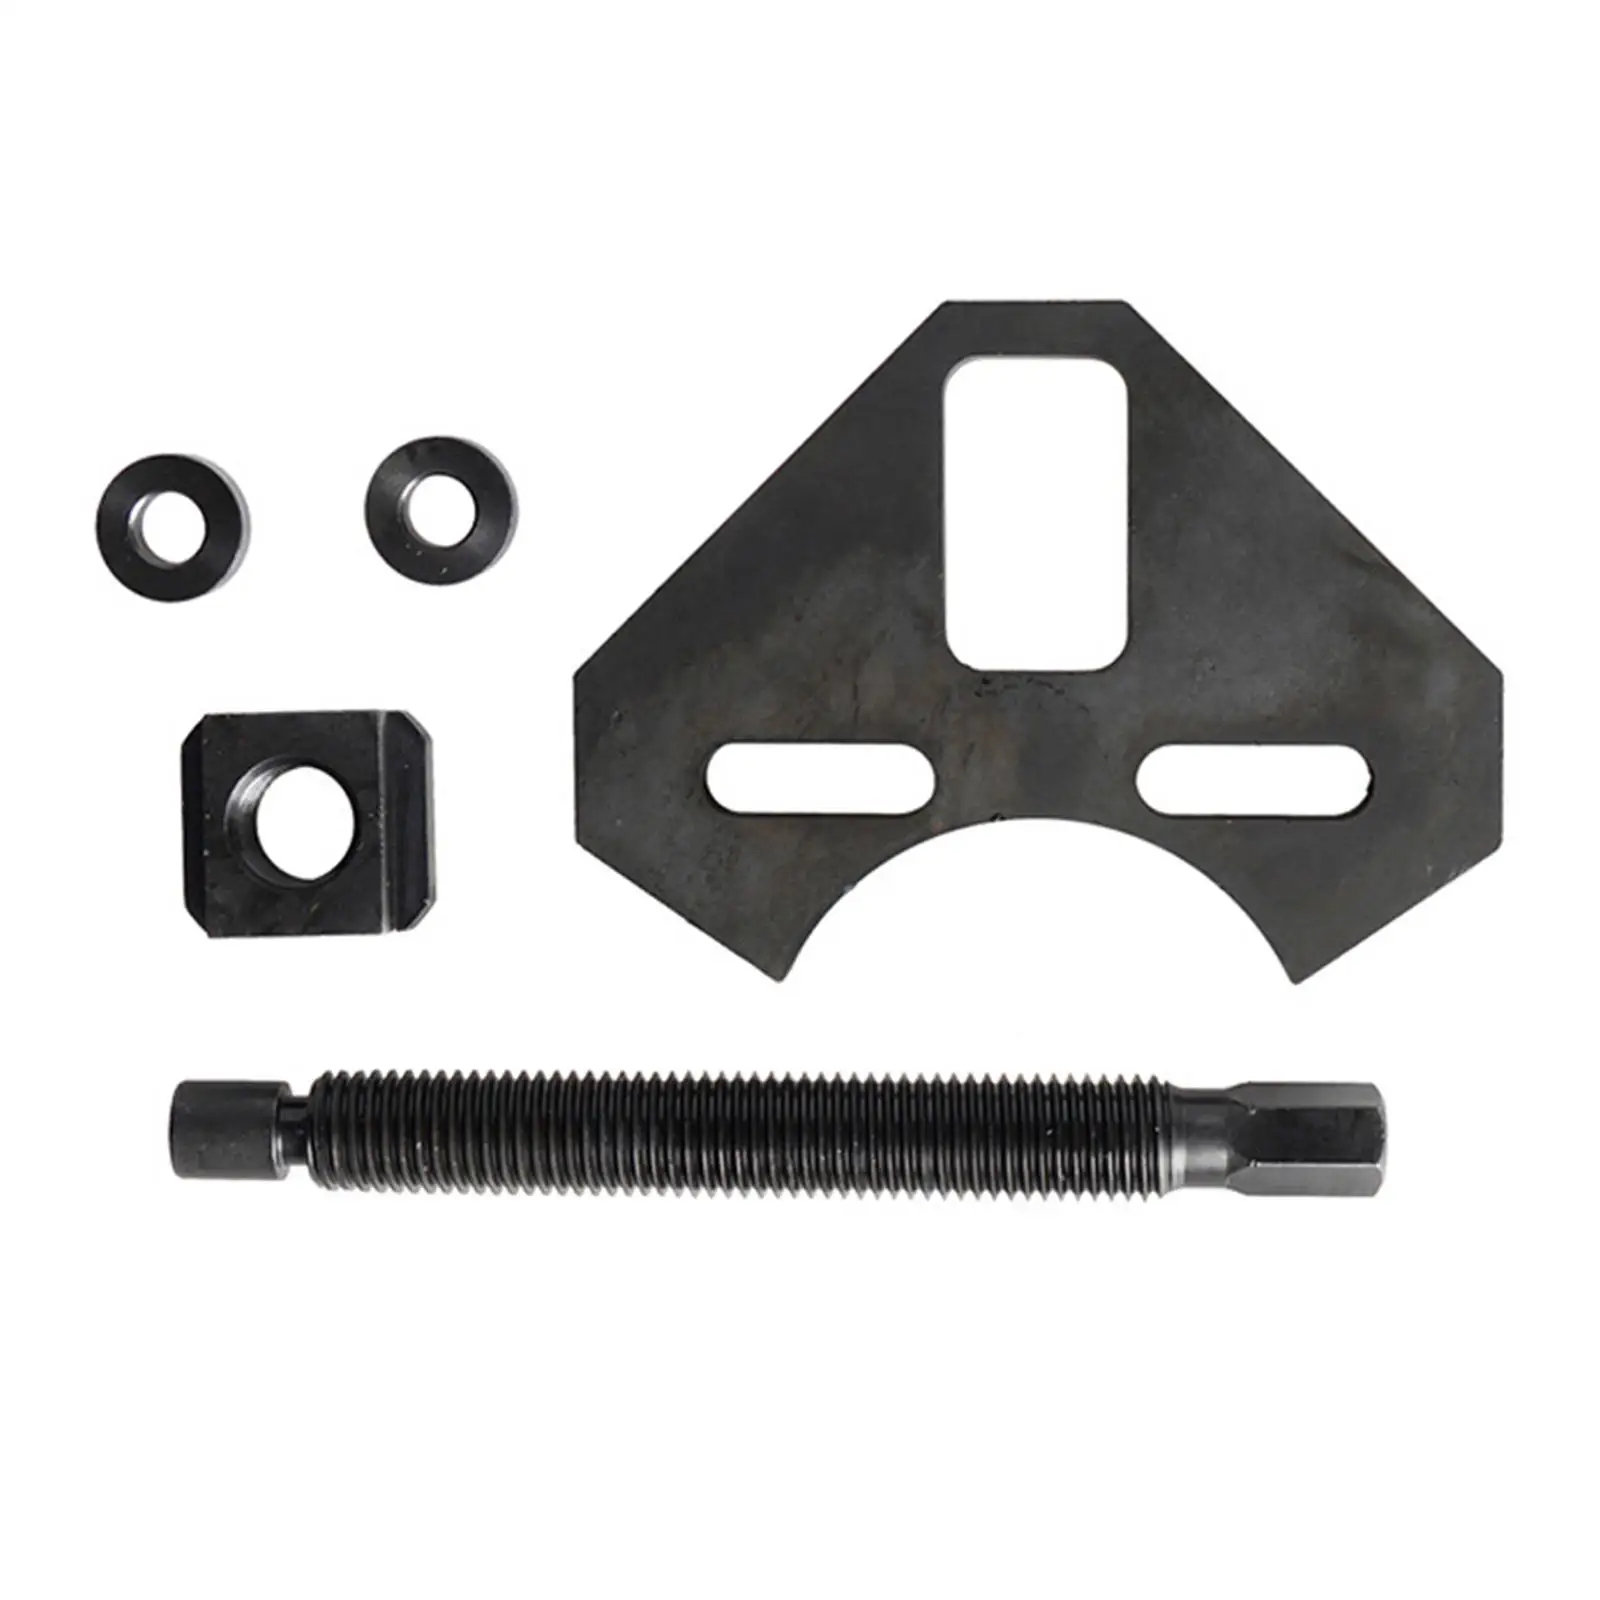 Hub Removal Tool Easy to Install Durable Practical for Most 5 6 8 Lug Hub Assemblies